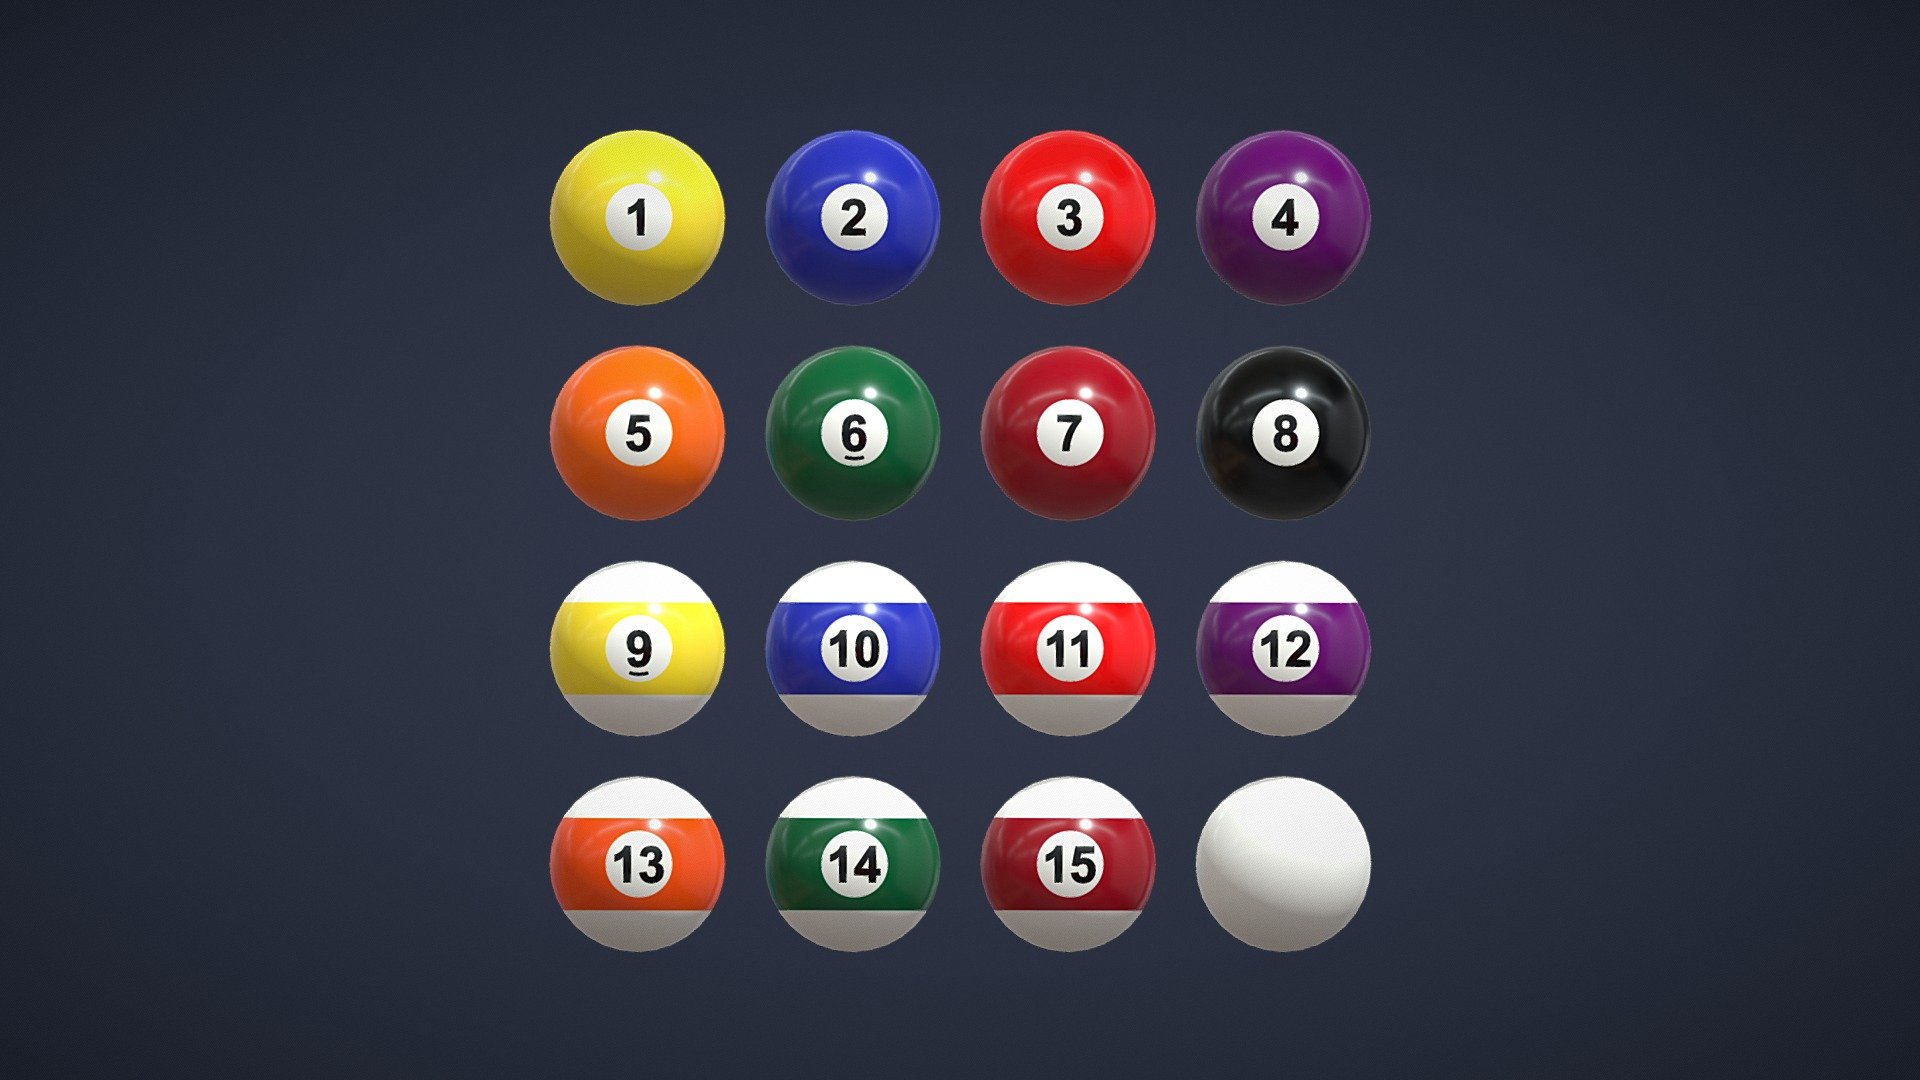 Set of billiard balls

Pack include:

Balls 1-15




LOD0 - 3 072 tris

LOD1 - 768 tris

LOD2 - 192 tris

Diffuse 2048 x 2048 PNG textures

AR / VR / Mobile ready - Billiard Balls Set - Buy Royalty Free 3D model by Andrii Sedykh (@andriisedykh) 3d model